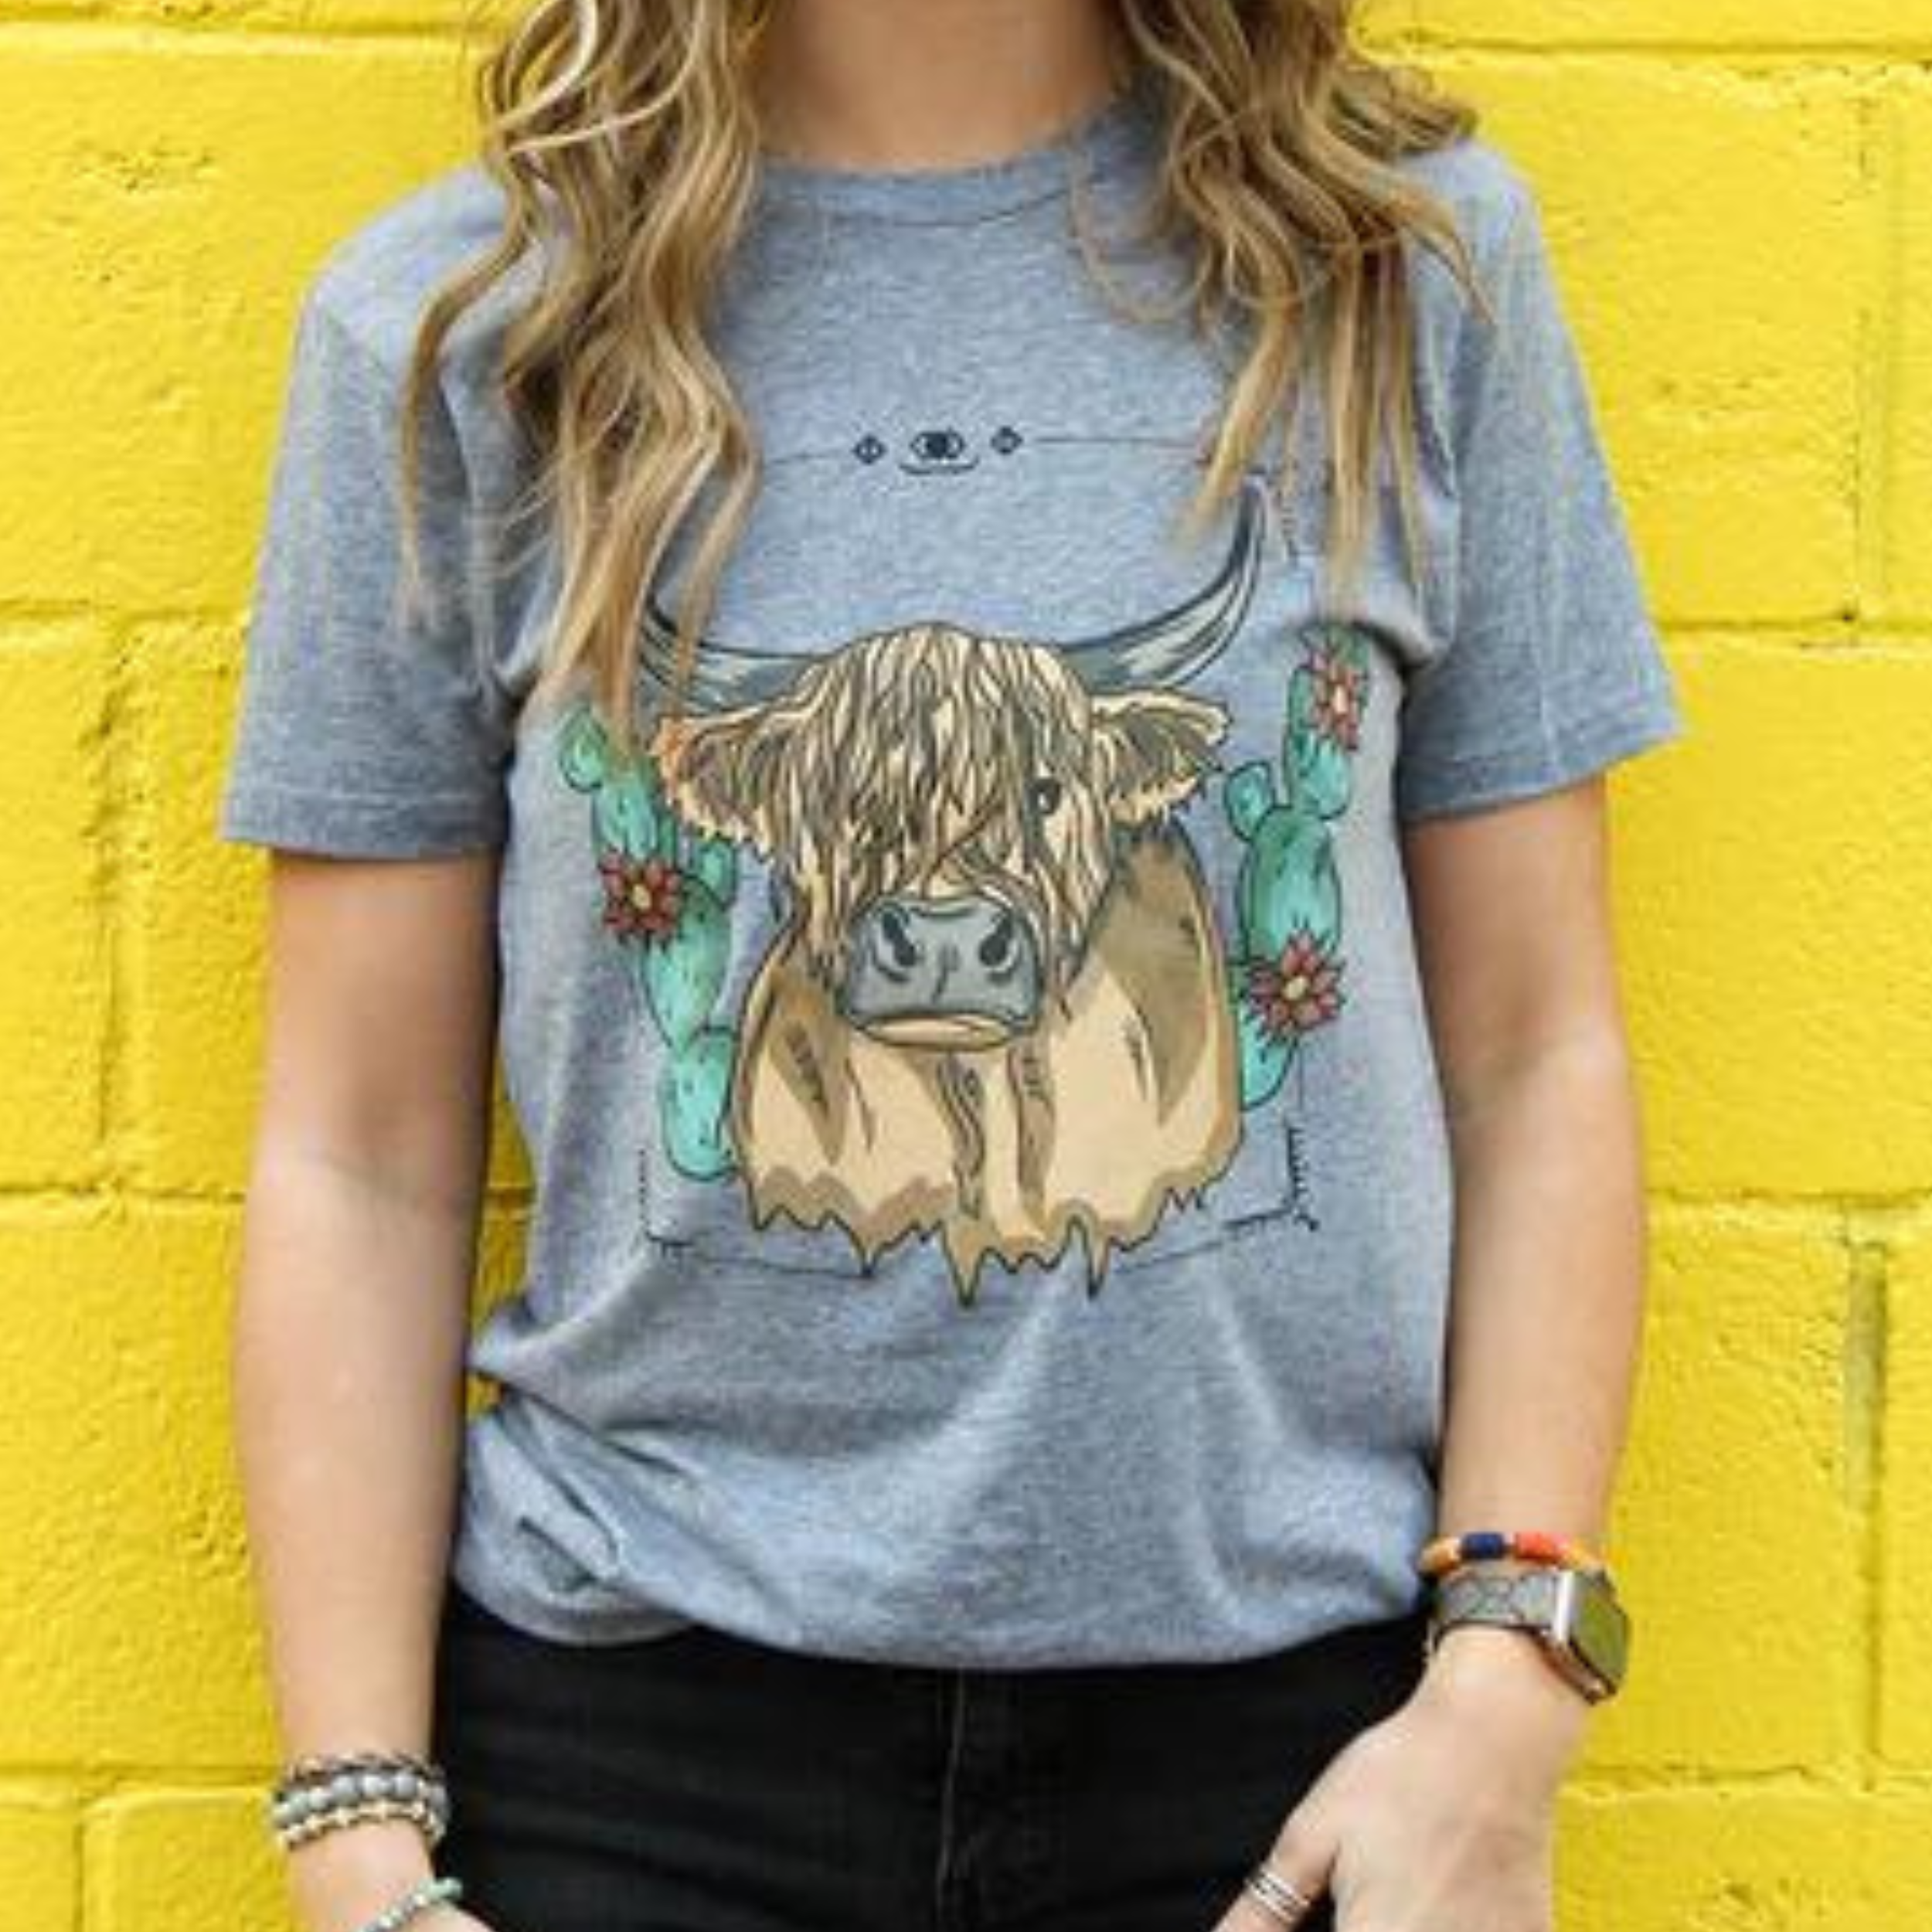 A gray short sleeve tee featuring a graphic of a cow's face with green cacti and pink flowers on both sides. There is a thin border around the cow. Item is pictured on a yellow background.